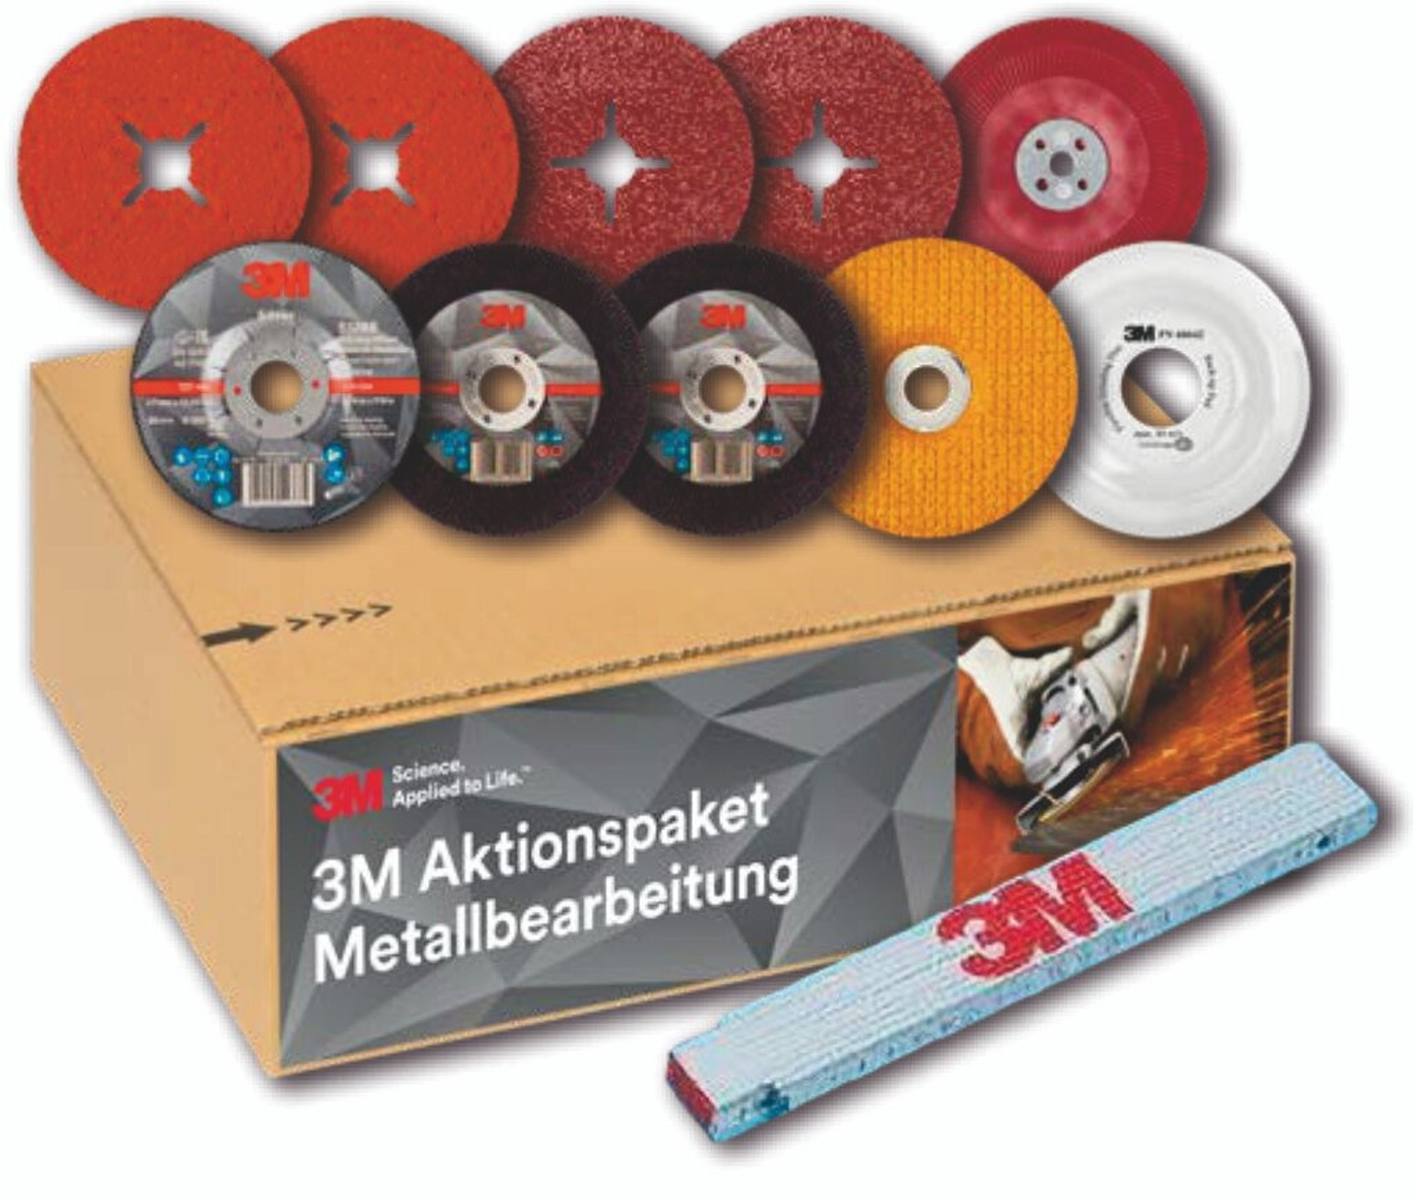 3M special offer package: 2x fibre disc 987C 125mm, 36 , 2x fibre disc 782C 125mm, 36 , 1x backing pad fibre discs hard/ribbed, 1x Silver grinding disc 125mmx7mm, 2x Silver cutting disc 125mmx1mm, 1x Flex Grind grinding disc 125mm, 36 , 1x backing pa